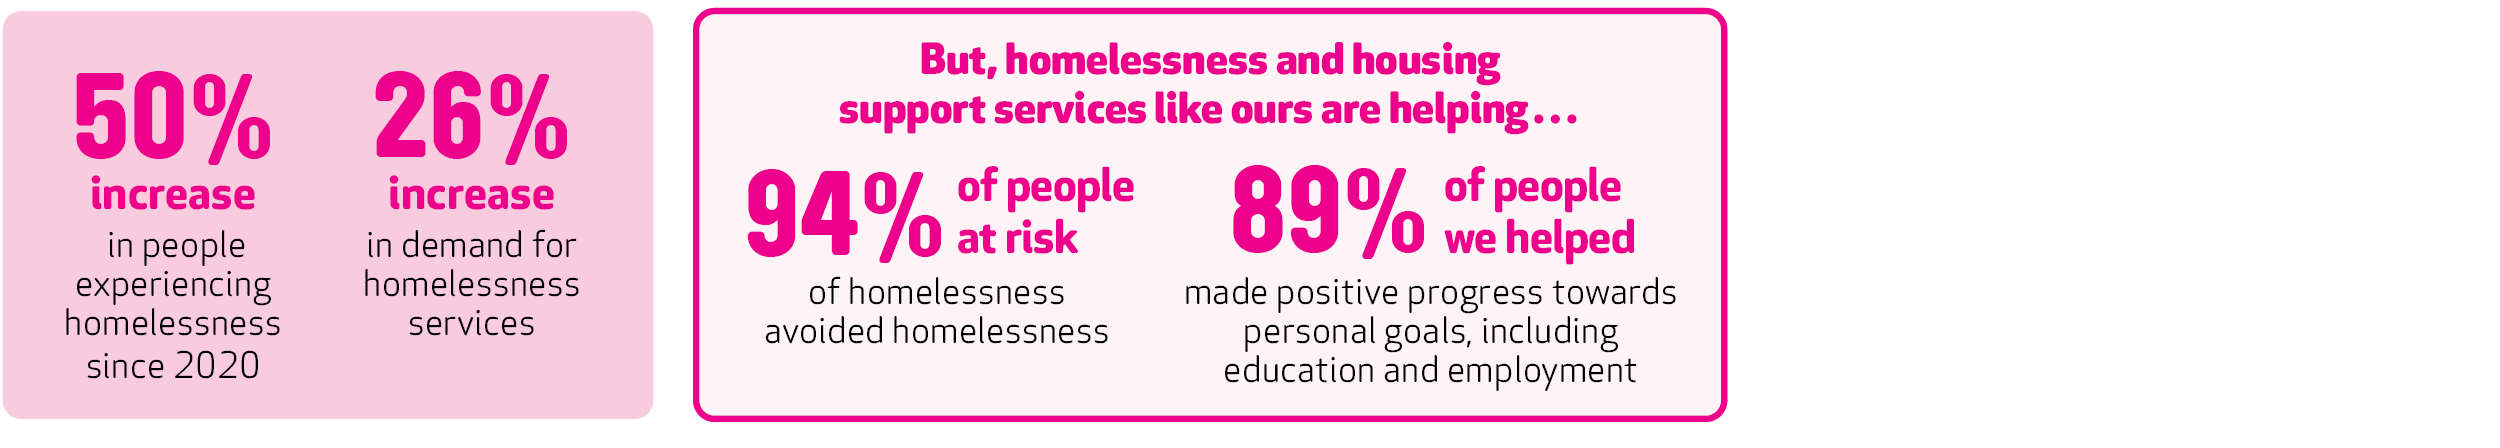 94% of people at risk of homelessness avoided homelessness! And, 89% of people we helped made positive progress towards personal goals, including education and employment.